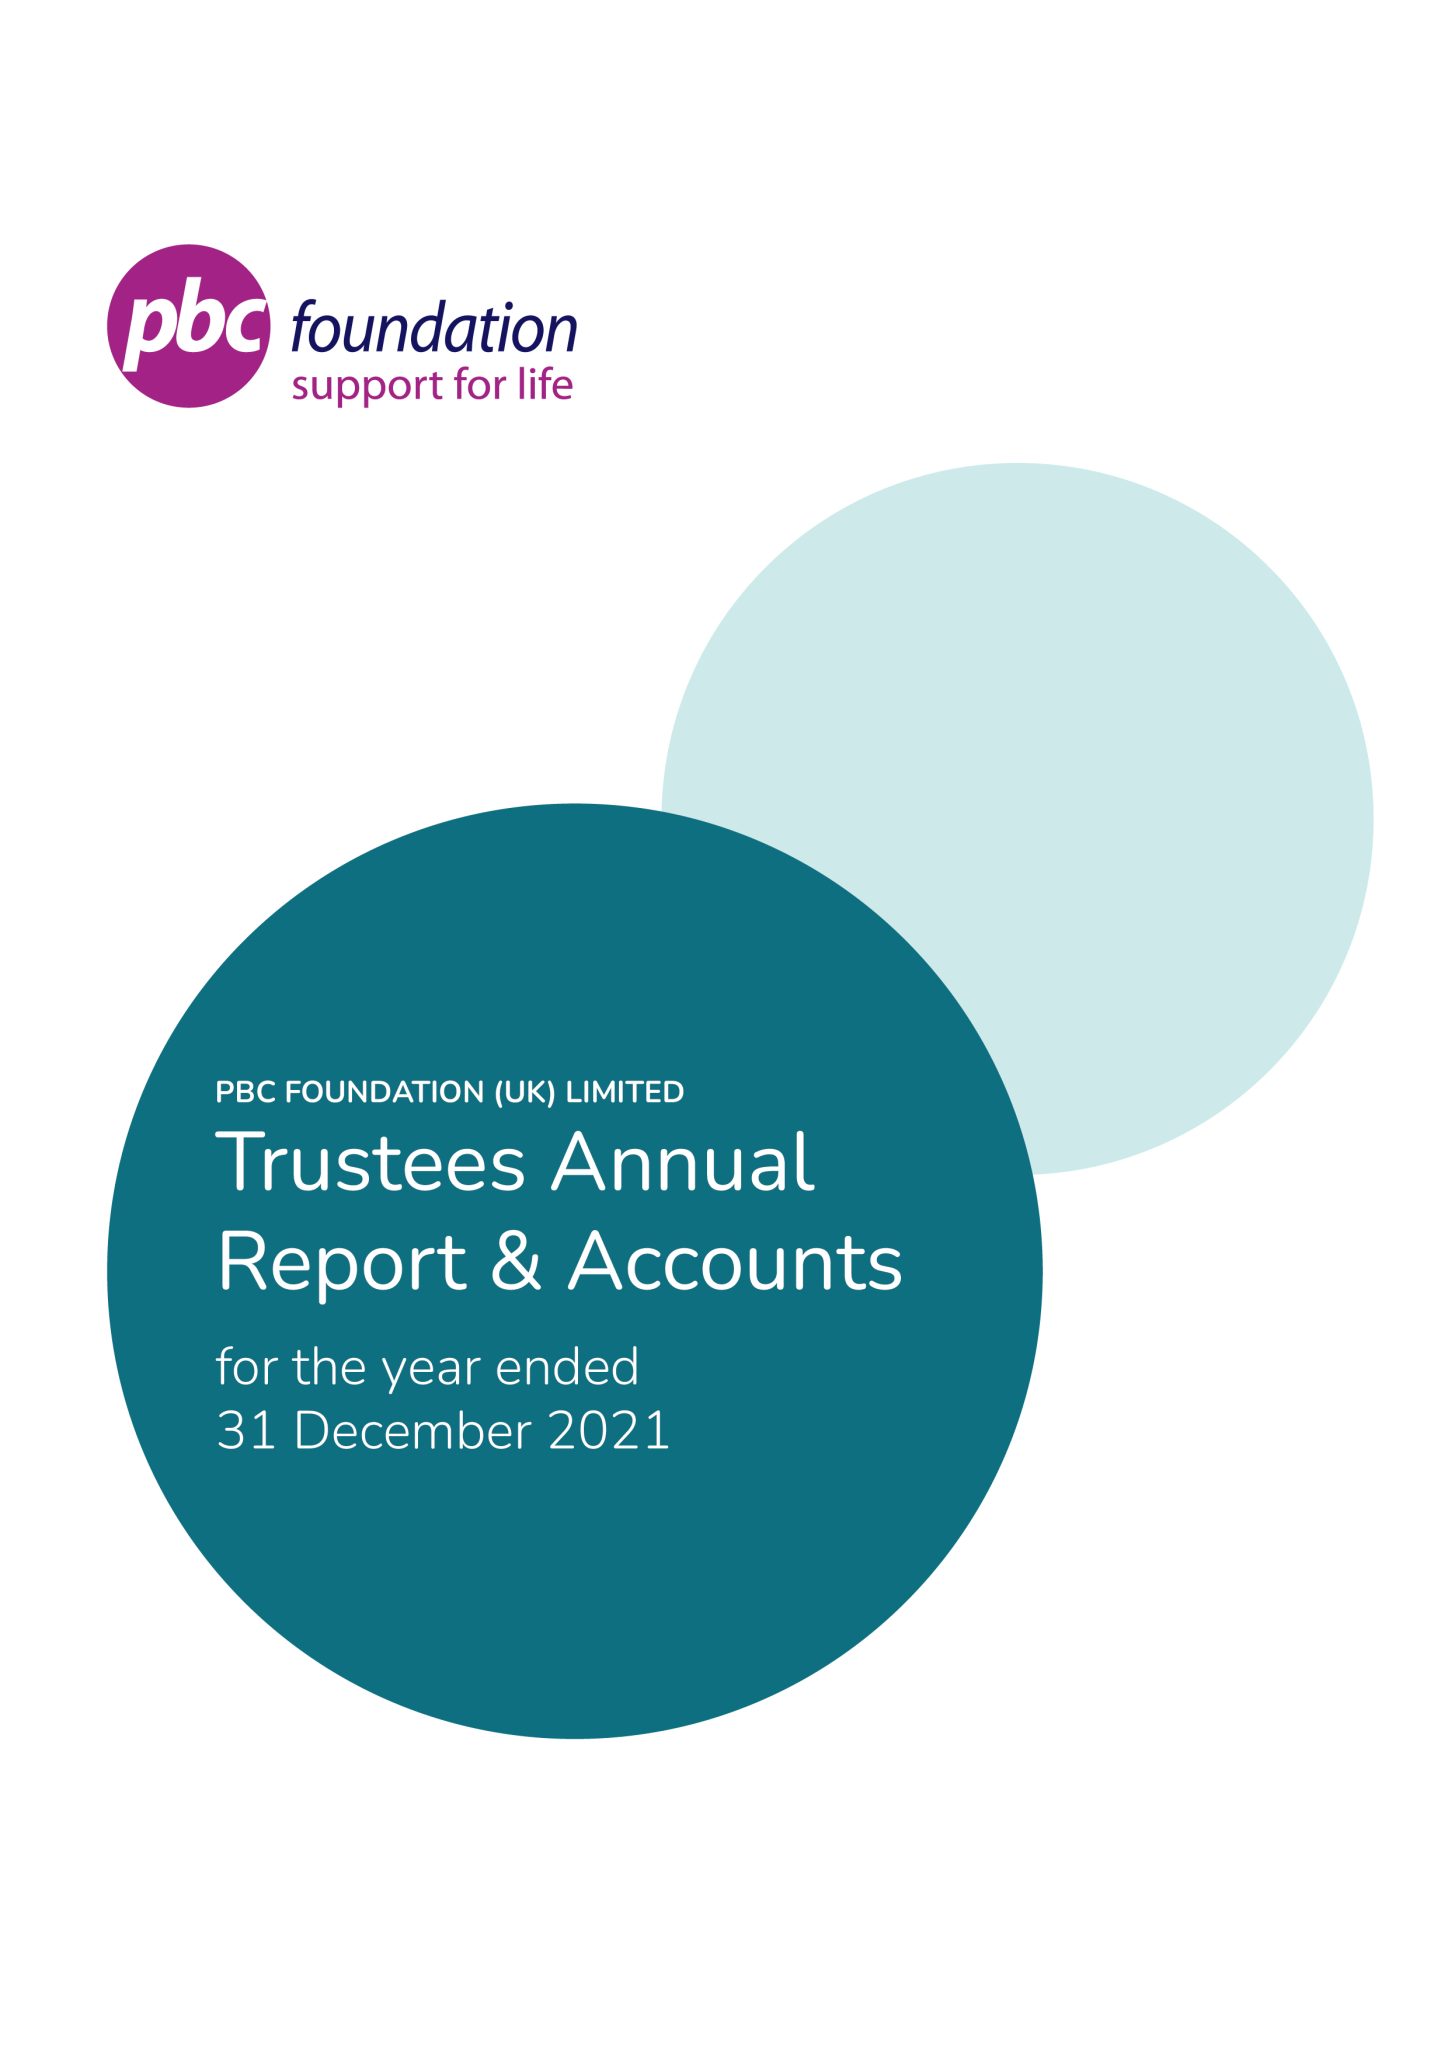 The cover of the PBC Foundation annual report and accounts for year ending 2021